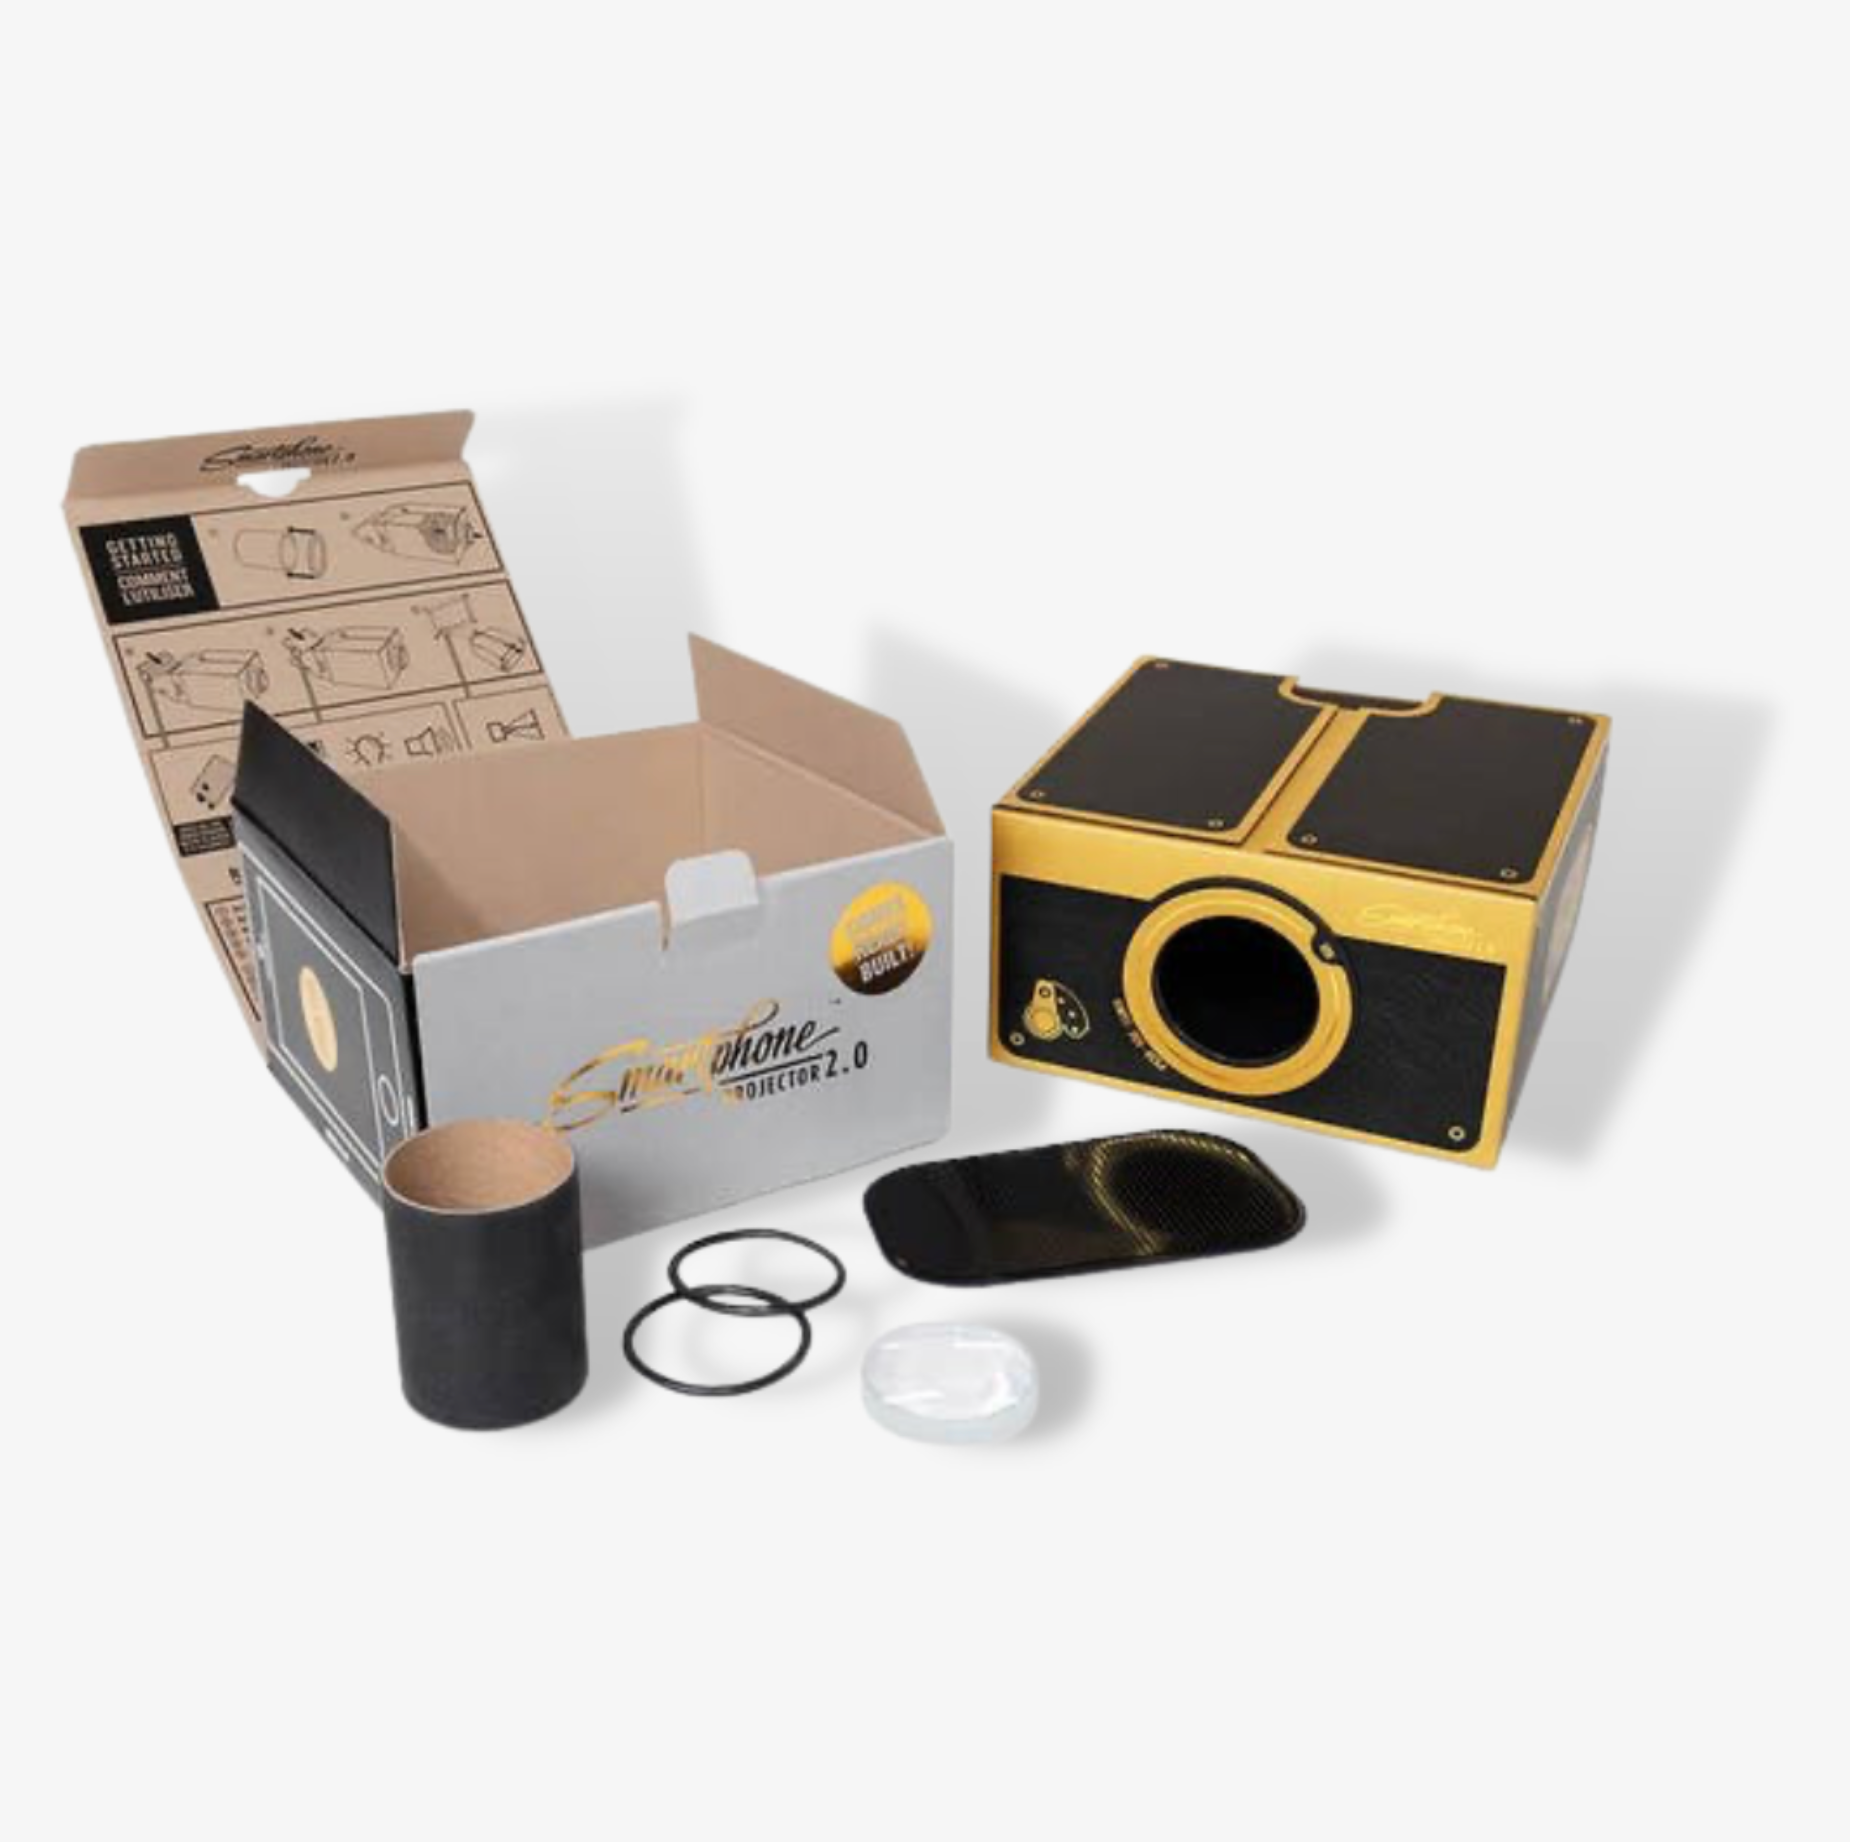 Smartphone Projector 2.0 Black And Gold